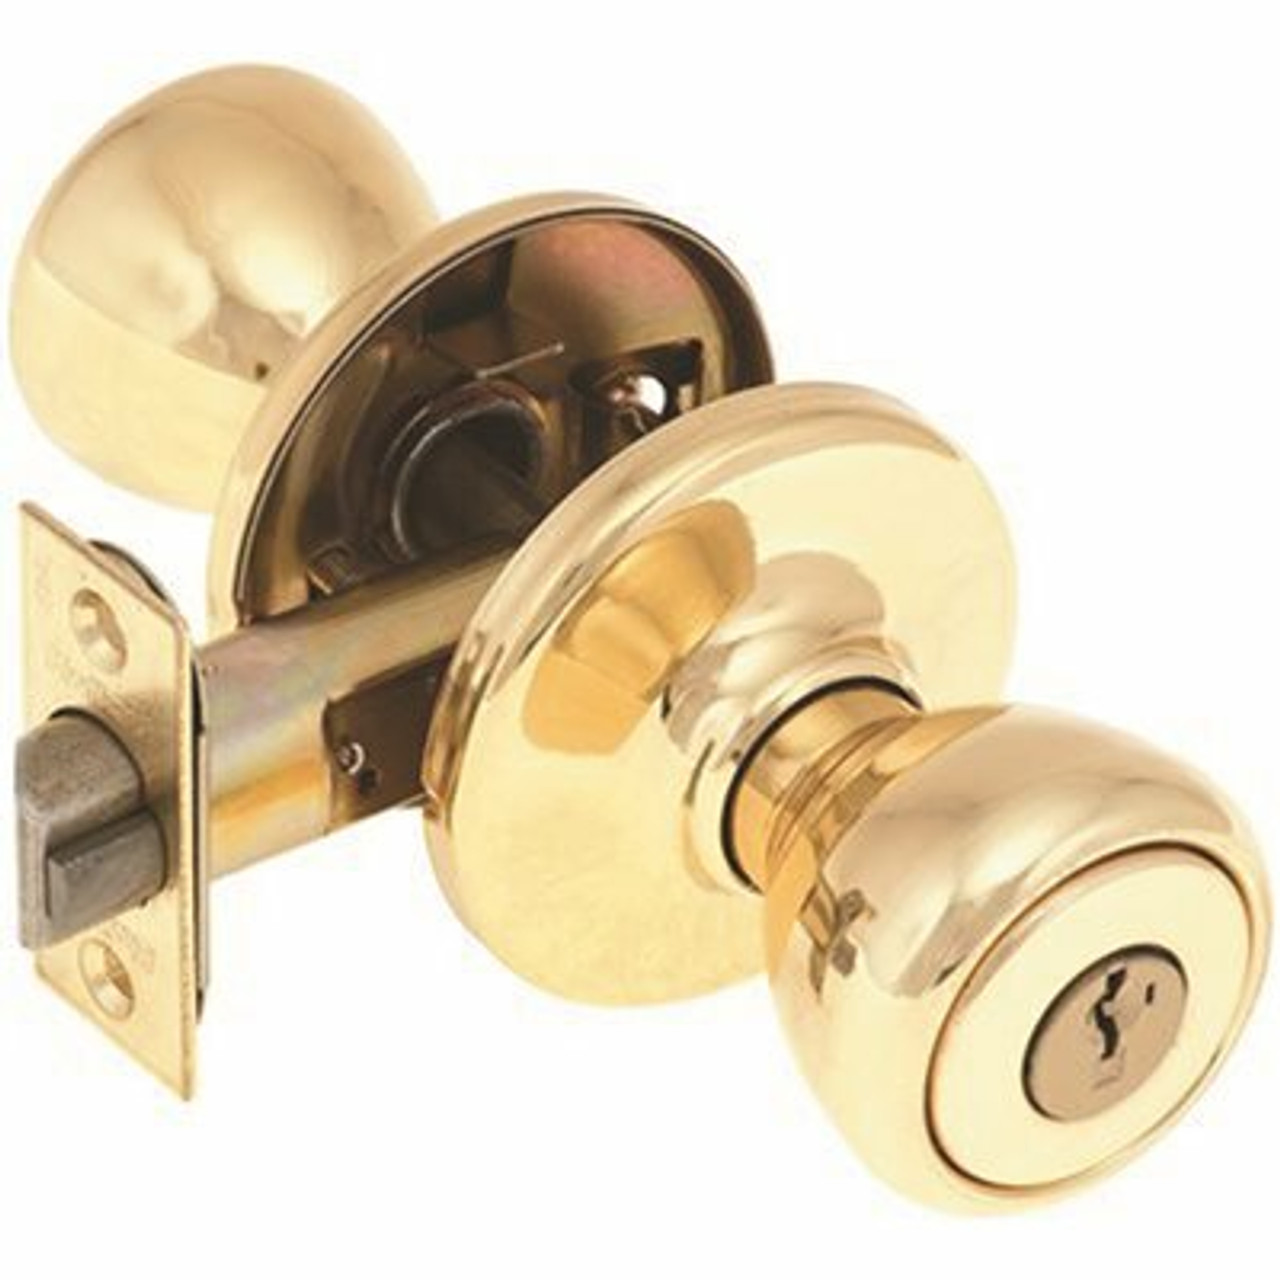 Kwikset Tylo Keyed Entry Door Knob Featuring Smartkey Security In Polished Brass